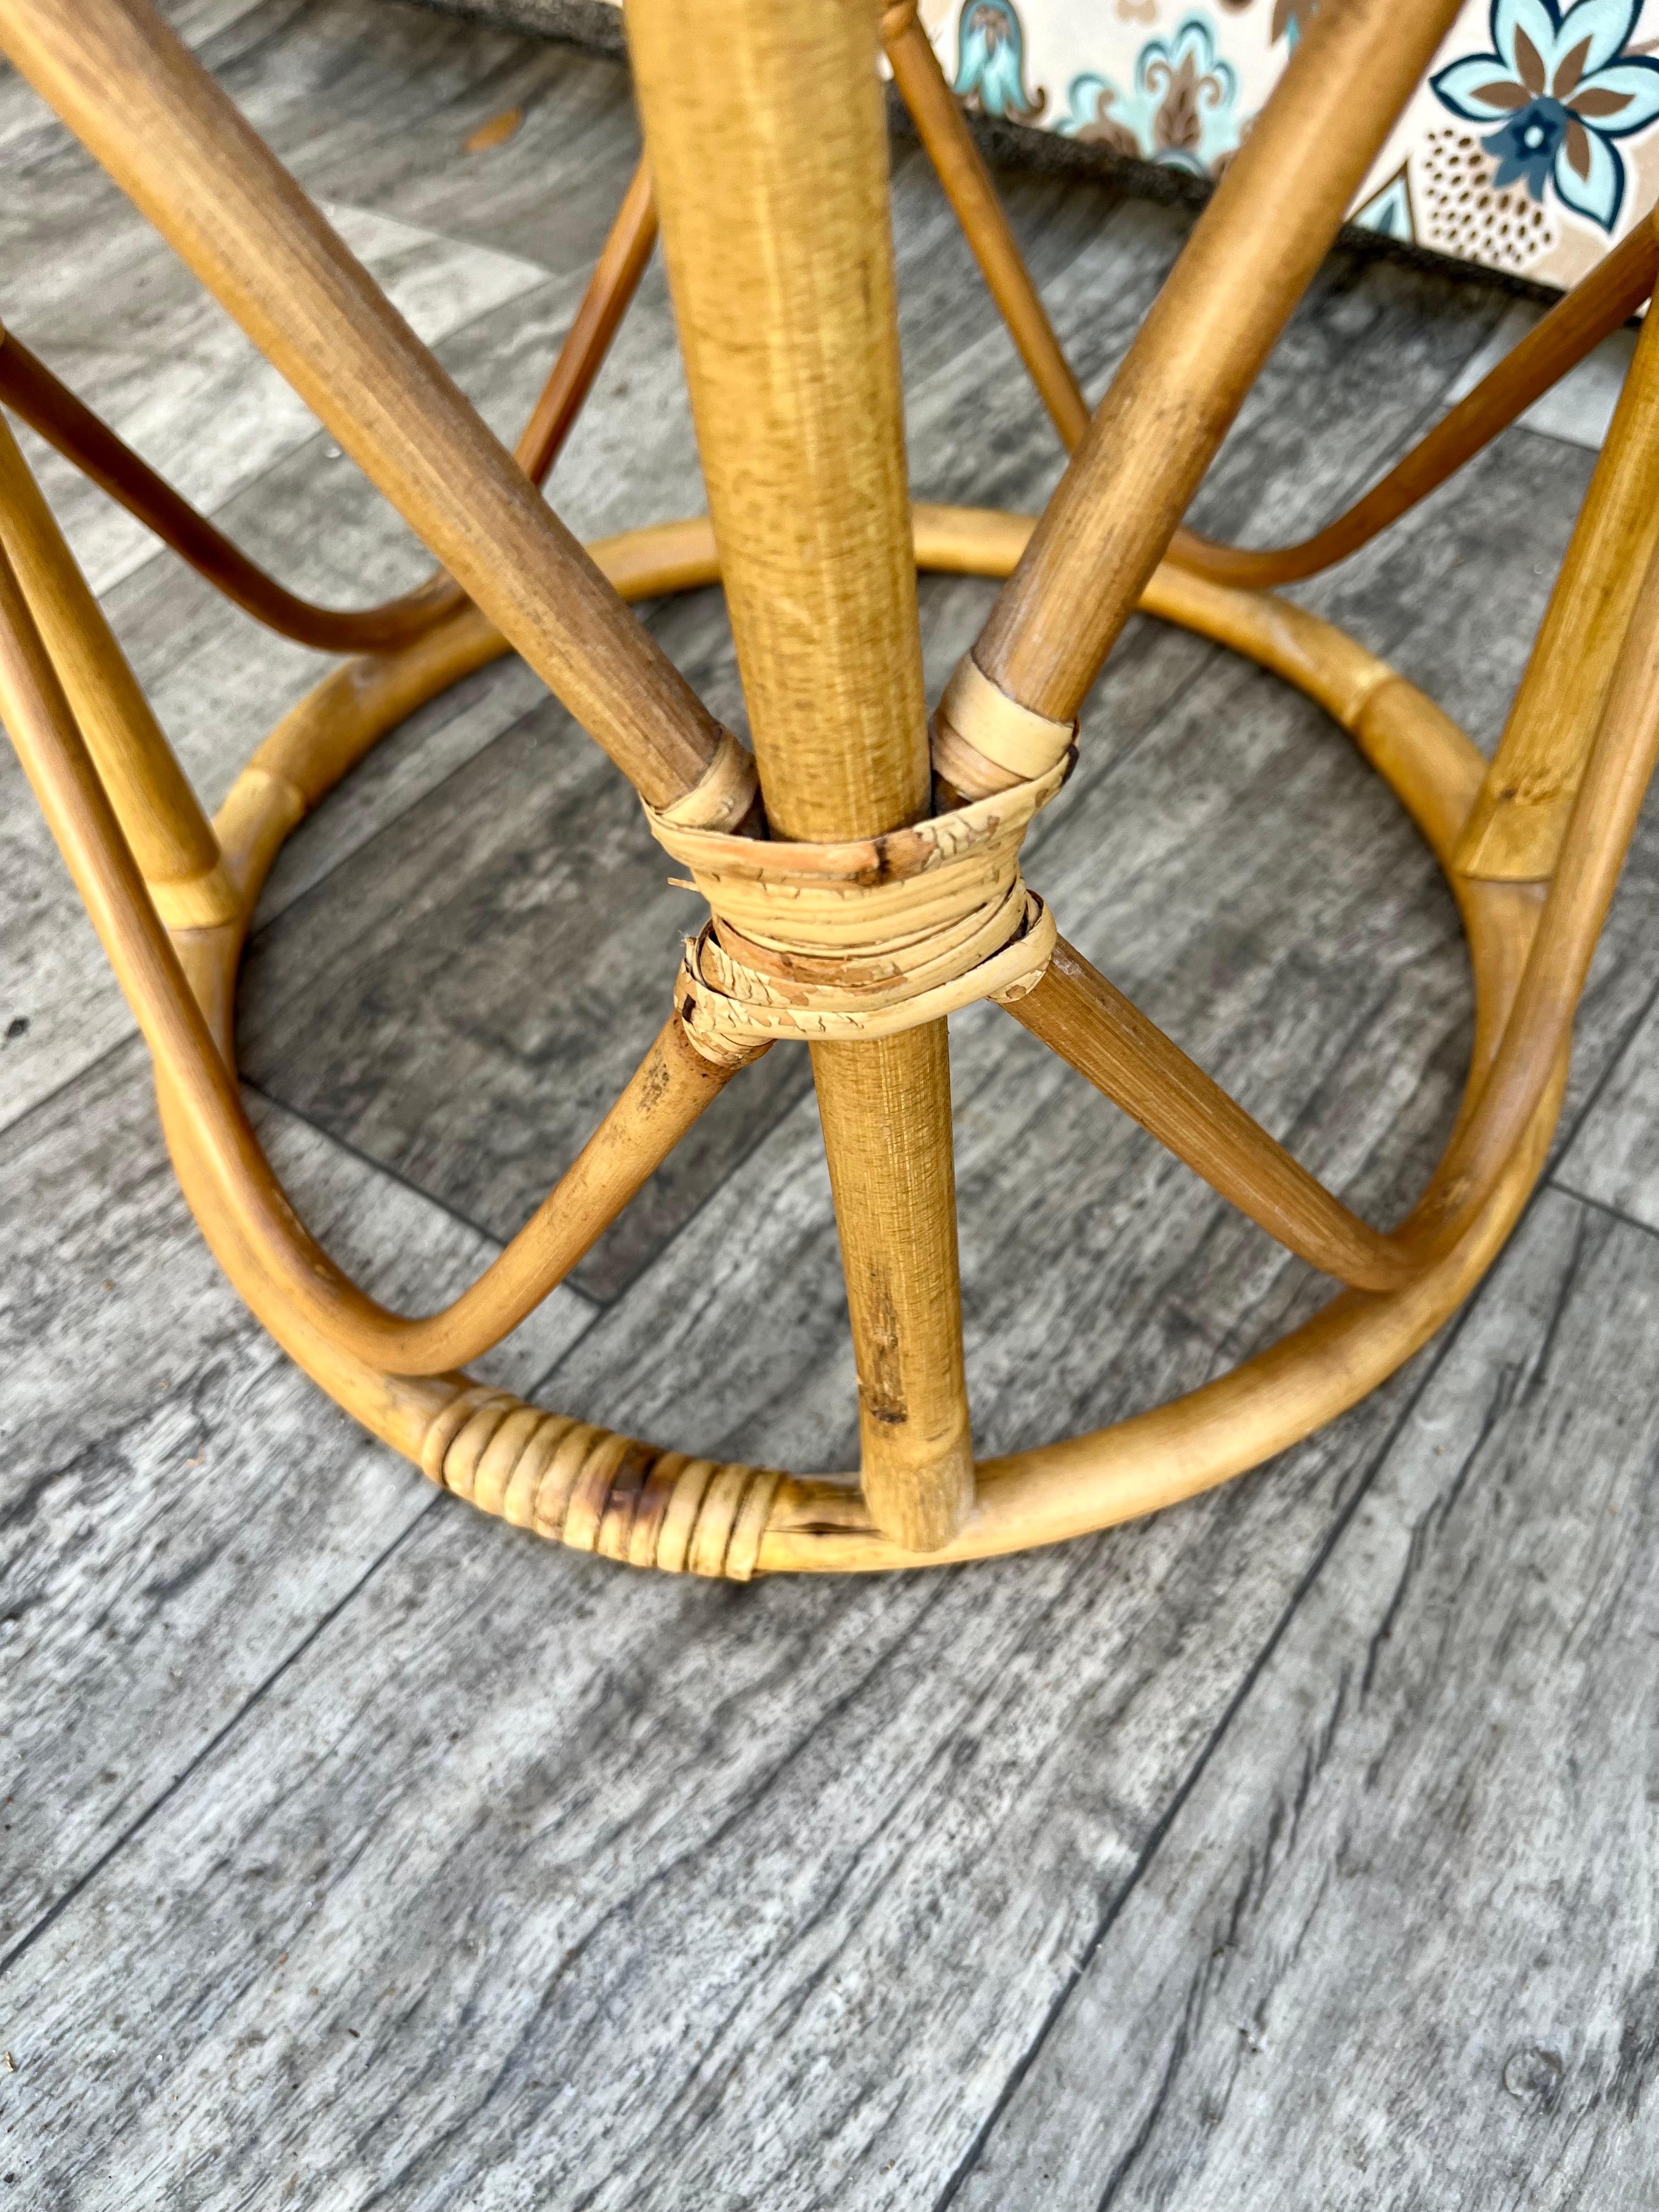 Coastal Style Bamboo and Rattan Round Side Table / Plant Stand. Circa 1970s  For Sale 10